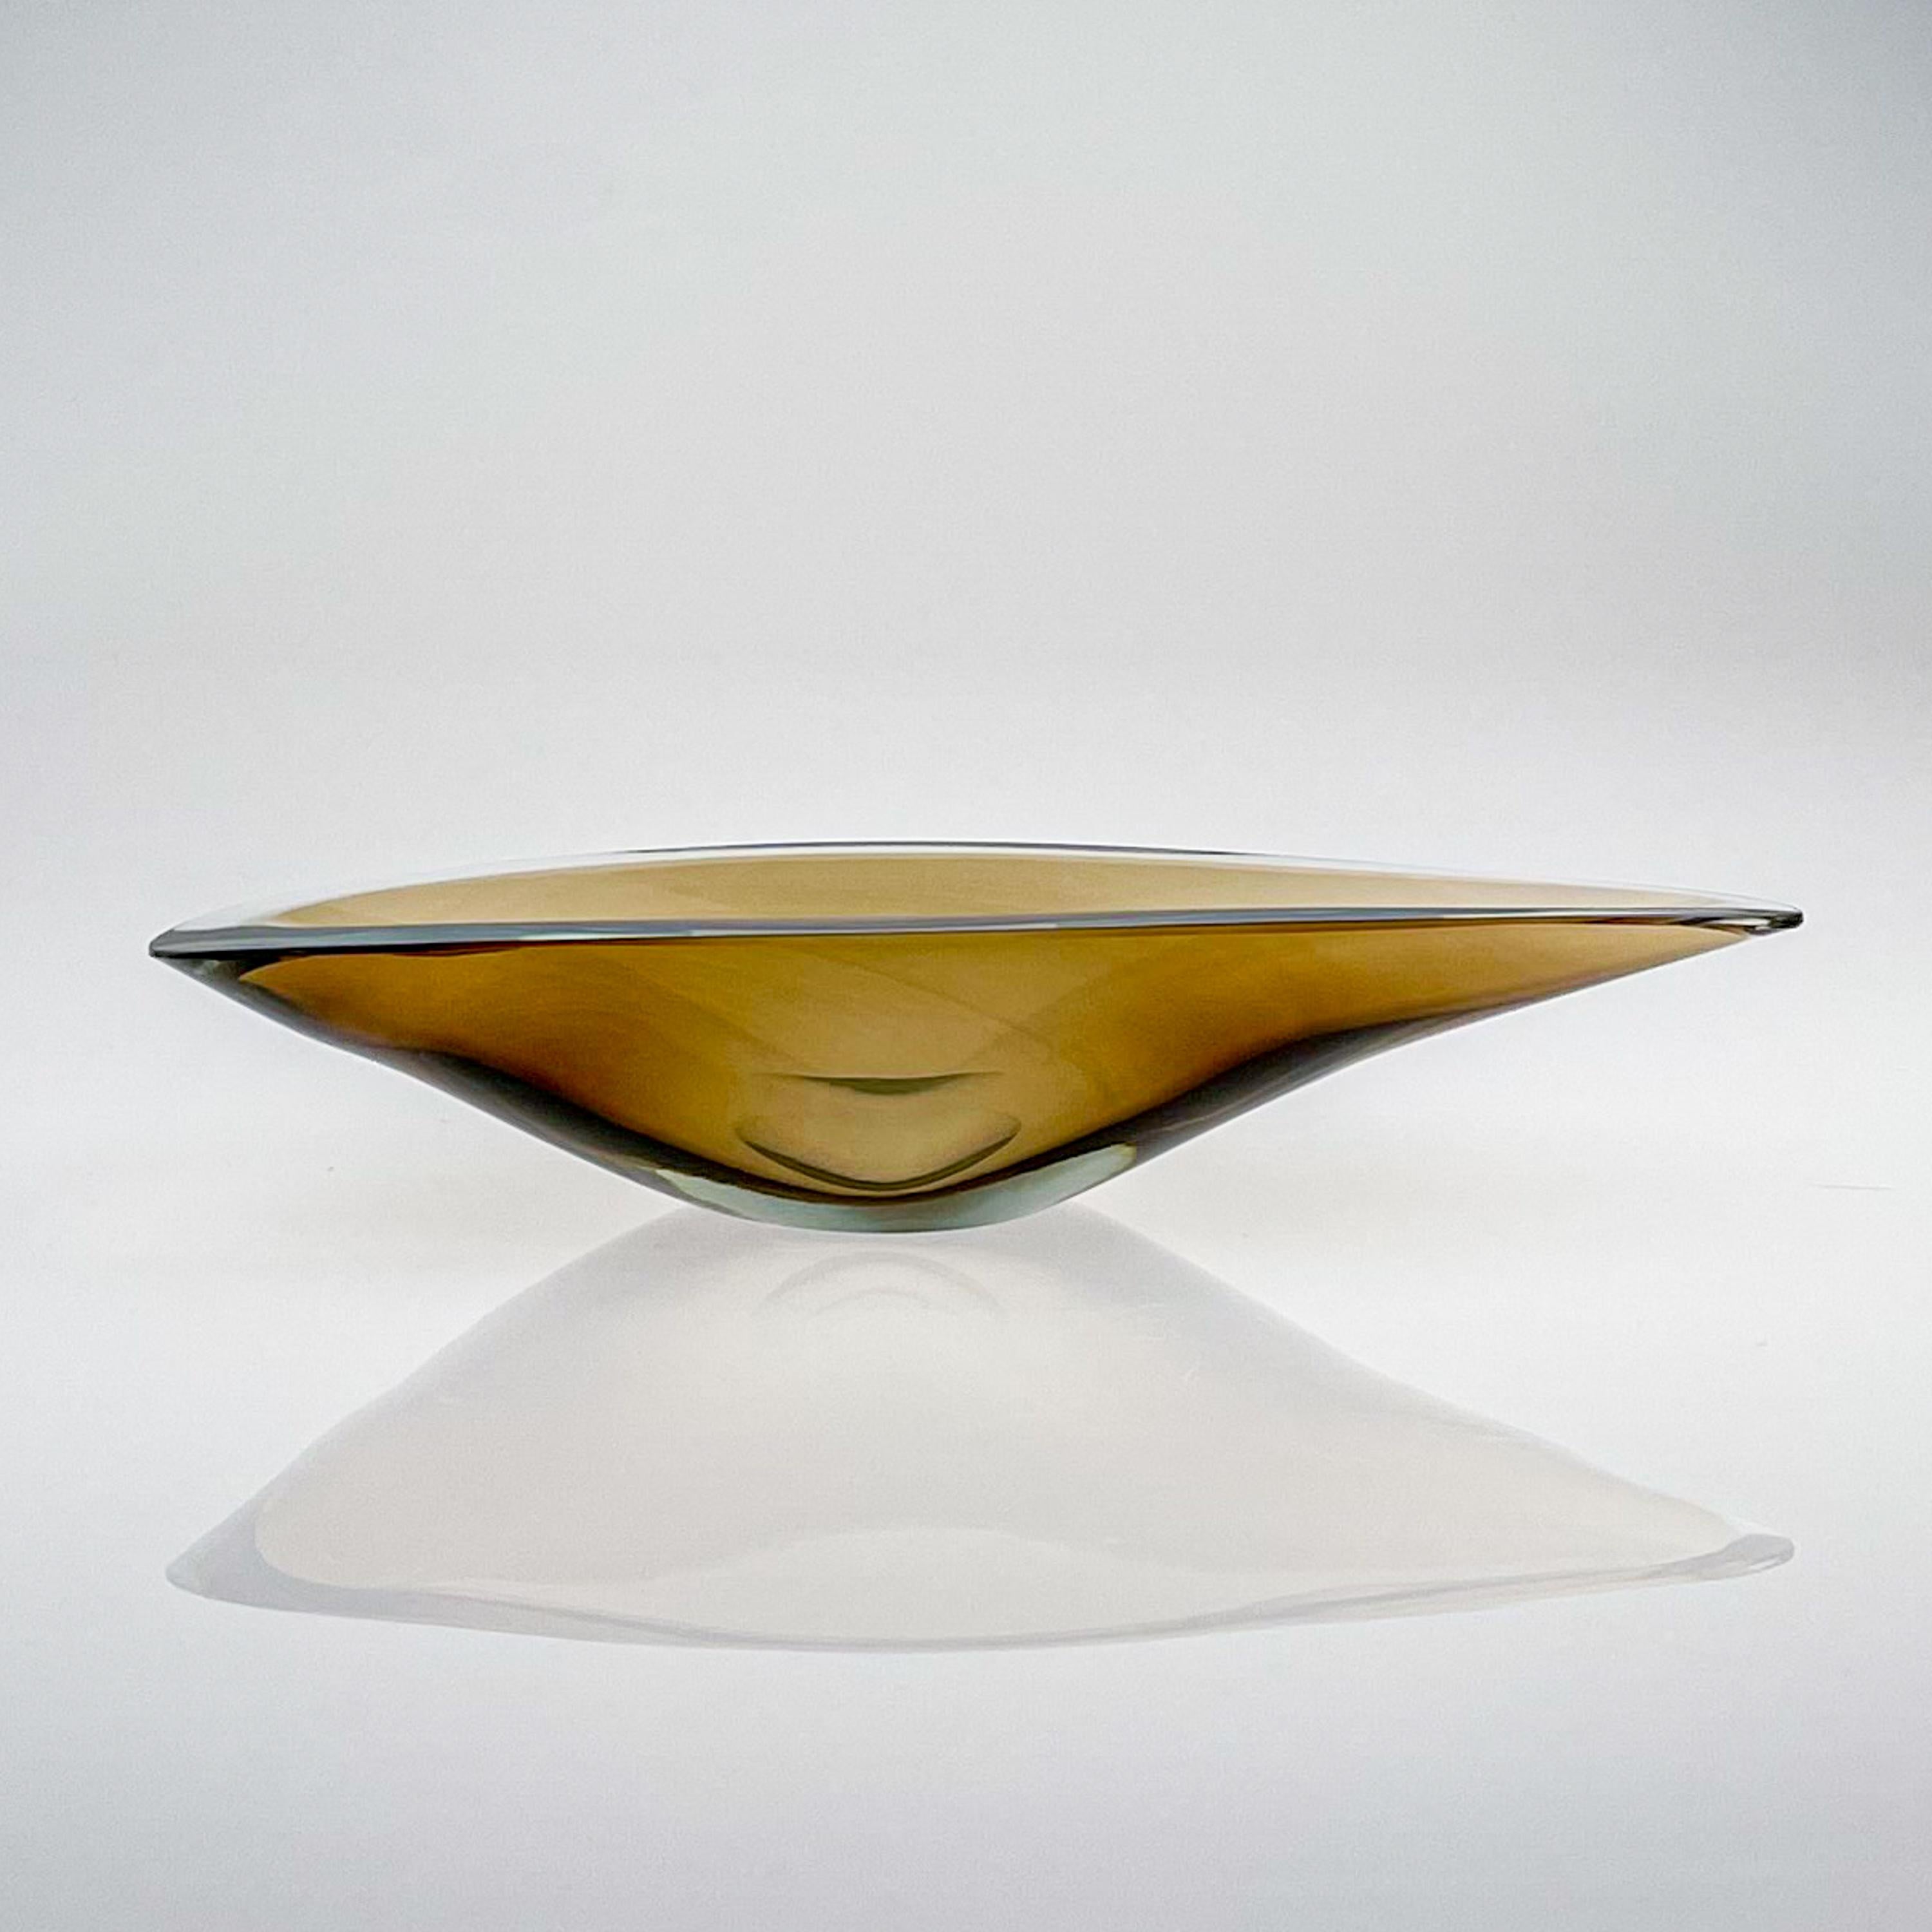 Mid Century Kaj Franck Glass Art Dish Willowleaf Brown Clear Handblown Finland

A free blown, flared, cut and polished light brown and clear cased glass art-object “Pajunlehti” or “Willowleaf”, model KF 210. Designed by Kaj Franck in 1954 and